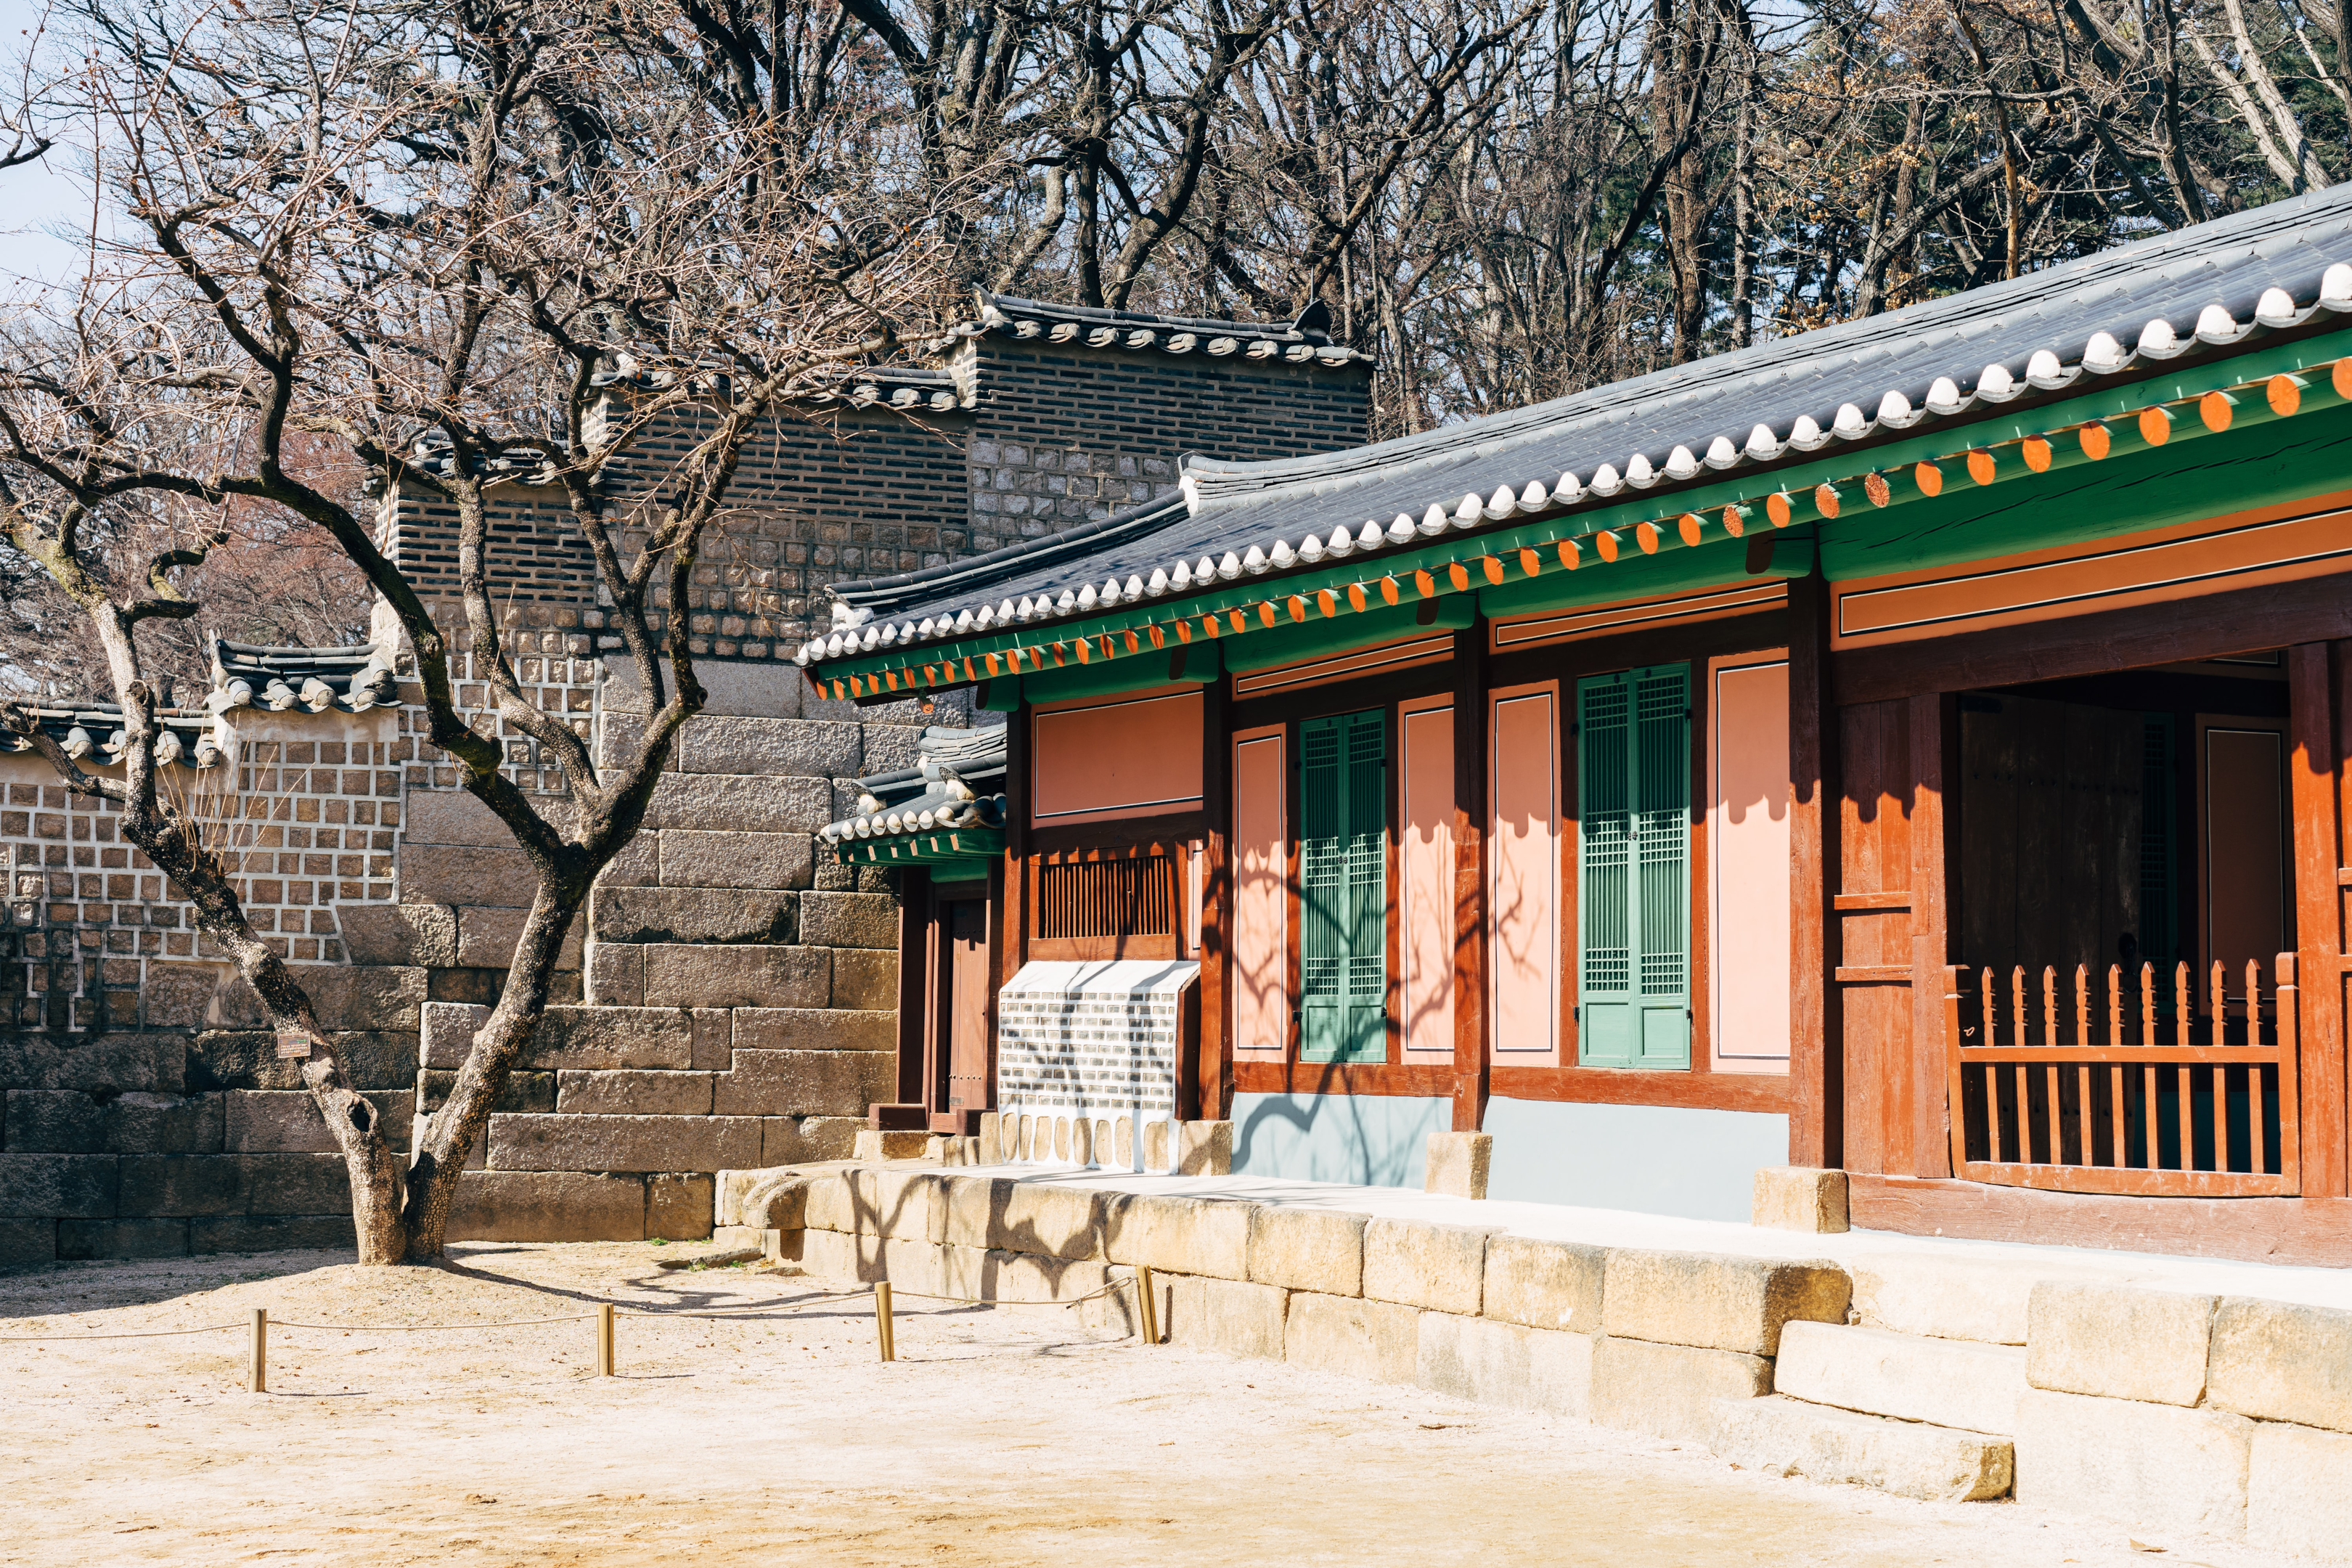 This is an example of a traditional South Korean architectural style. 